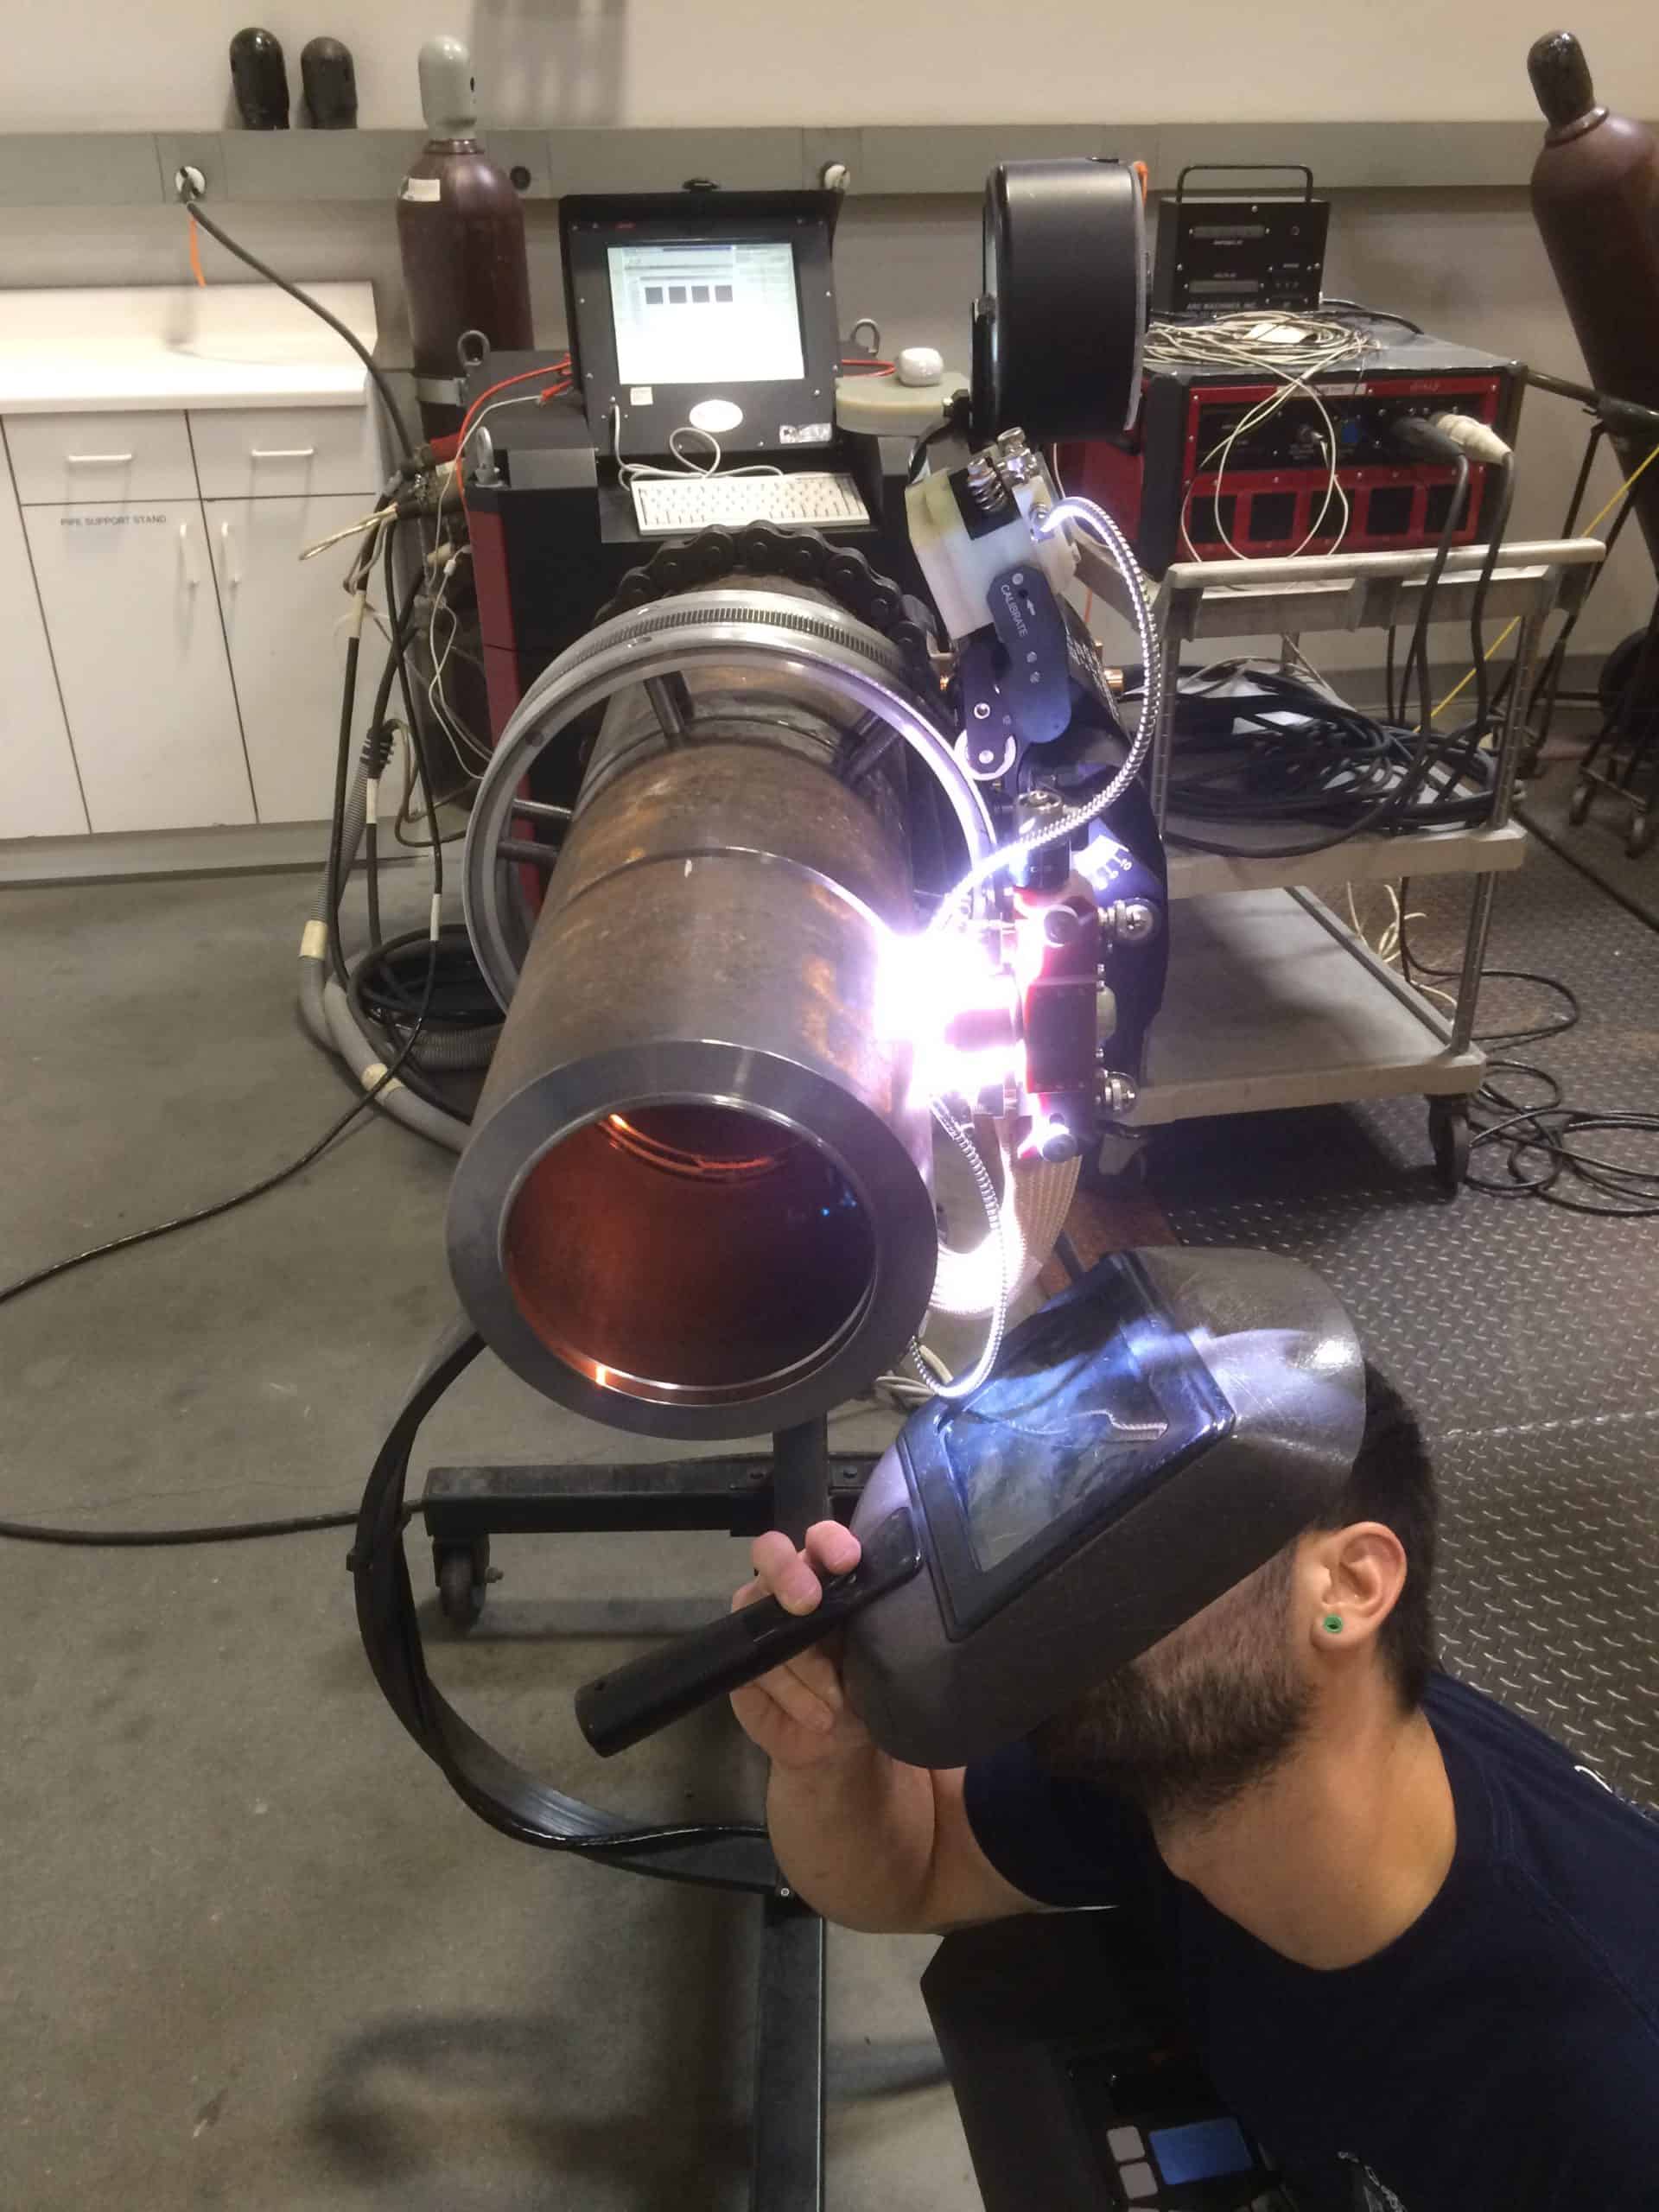 Orbital welding hazards can be minimized with proper training.